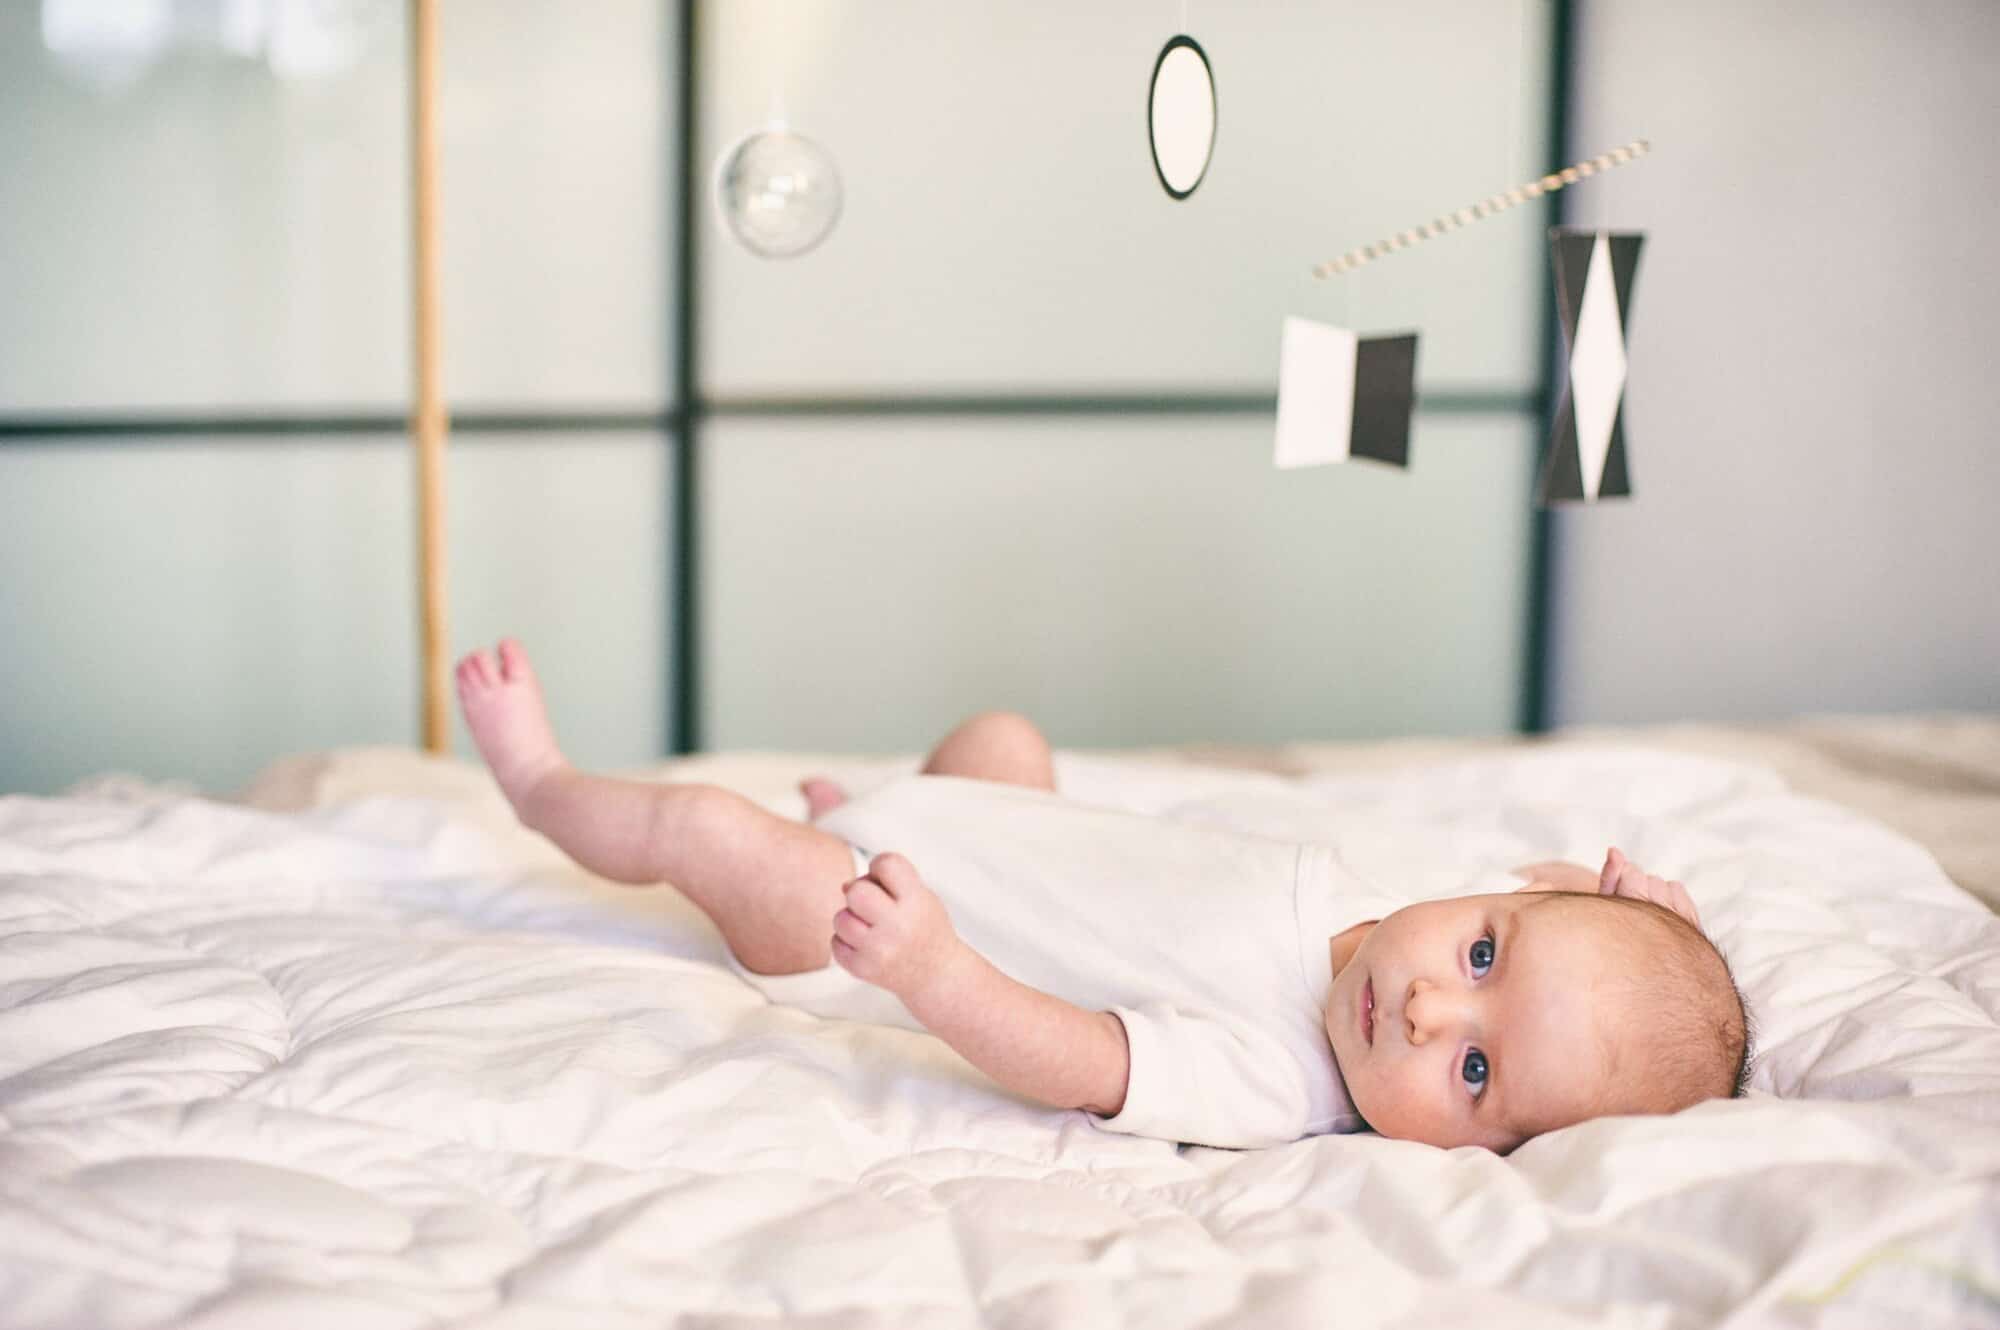 Adorable Baby Boy Infant In White Sunny Bedroom Lying And Looks At Munari Montessori Mobile.